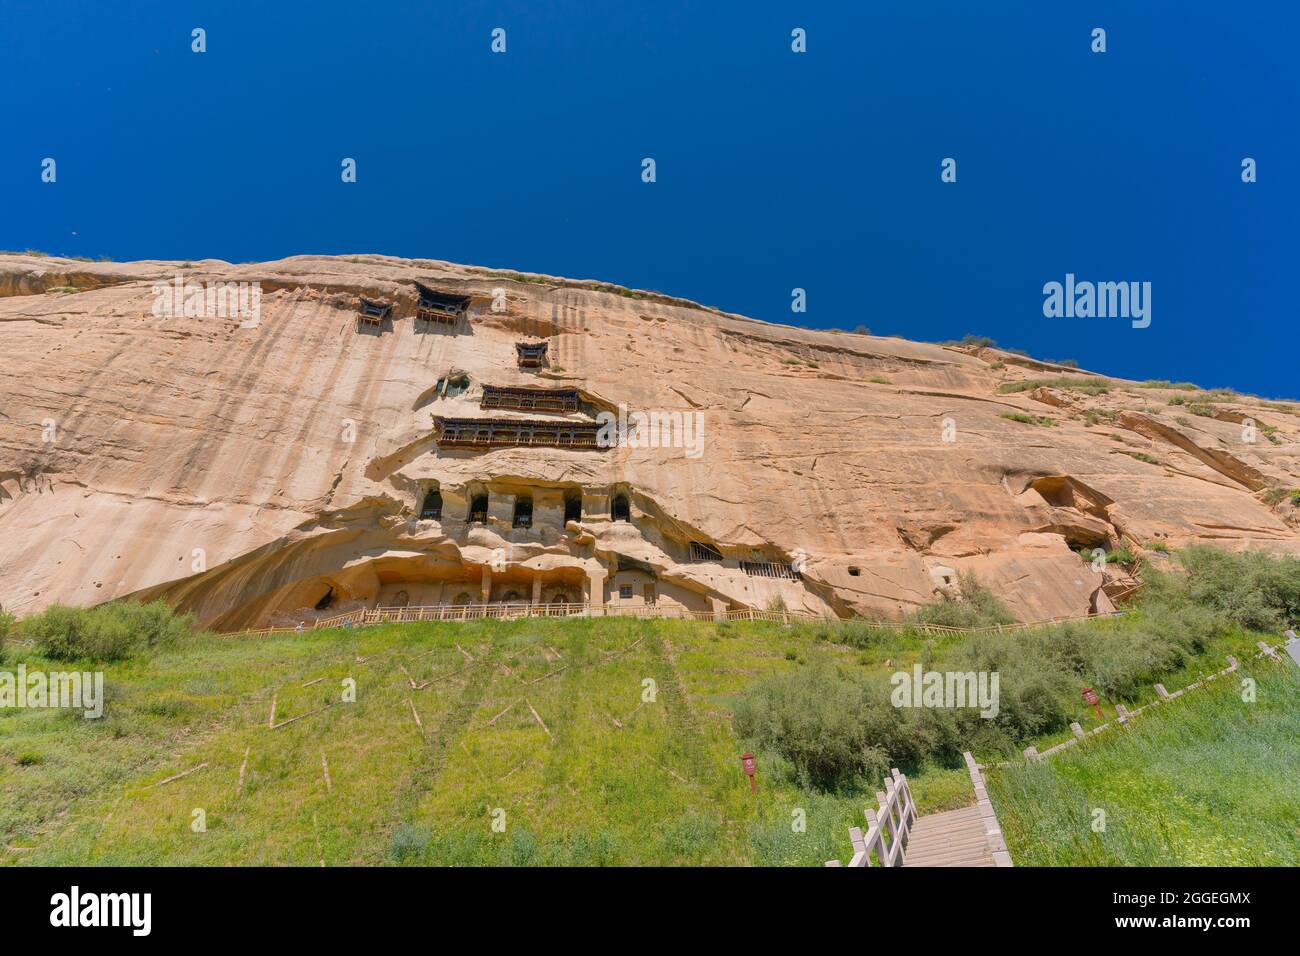 The Mati temple, a historic buddhism temple in Zhangye, Gansu province, China. Stock Photo